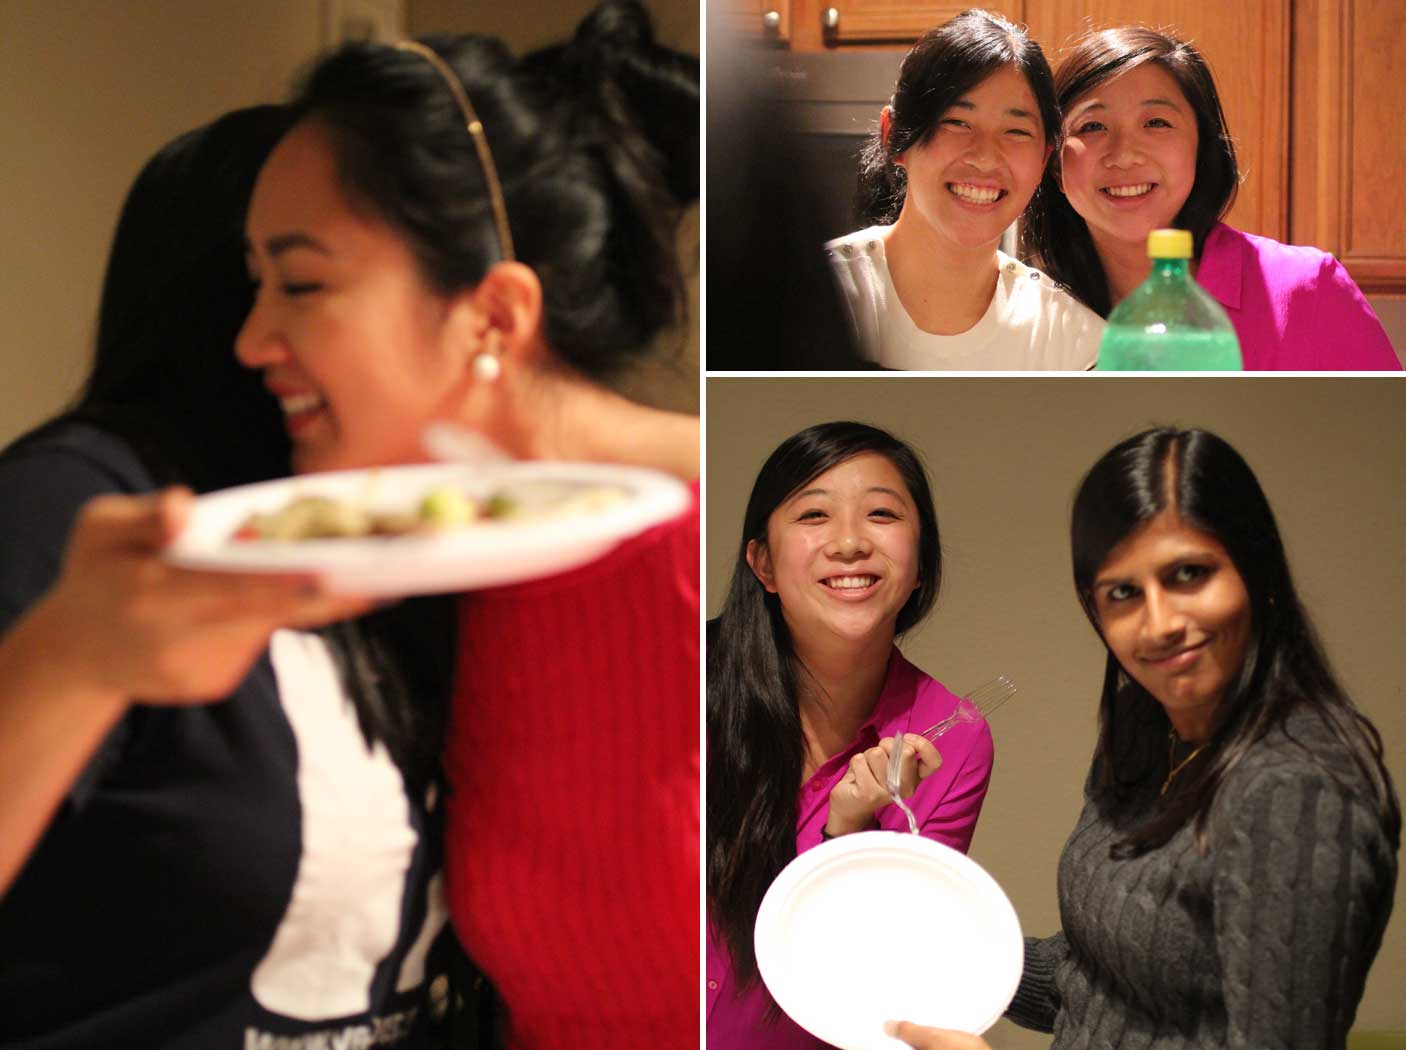 Top right: Krystal has been dubbed our honorary sister since she shares our love of food.